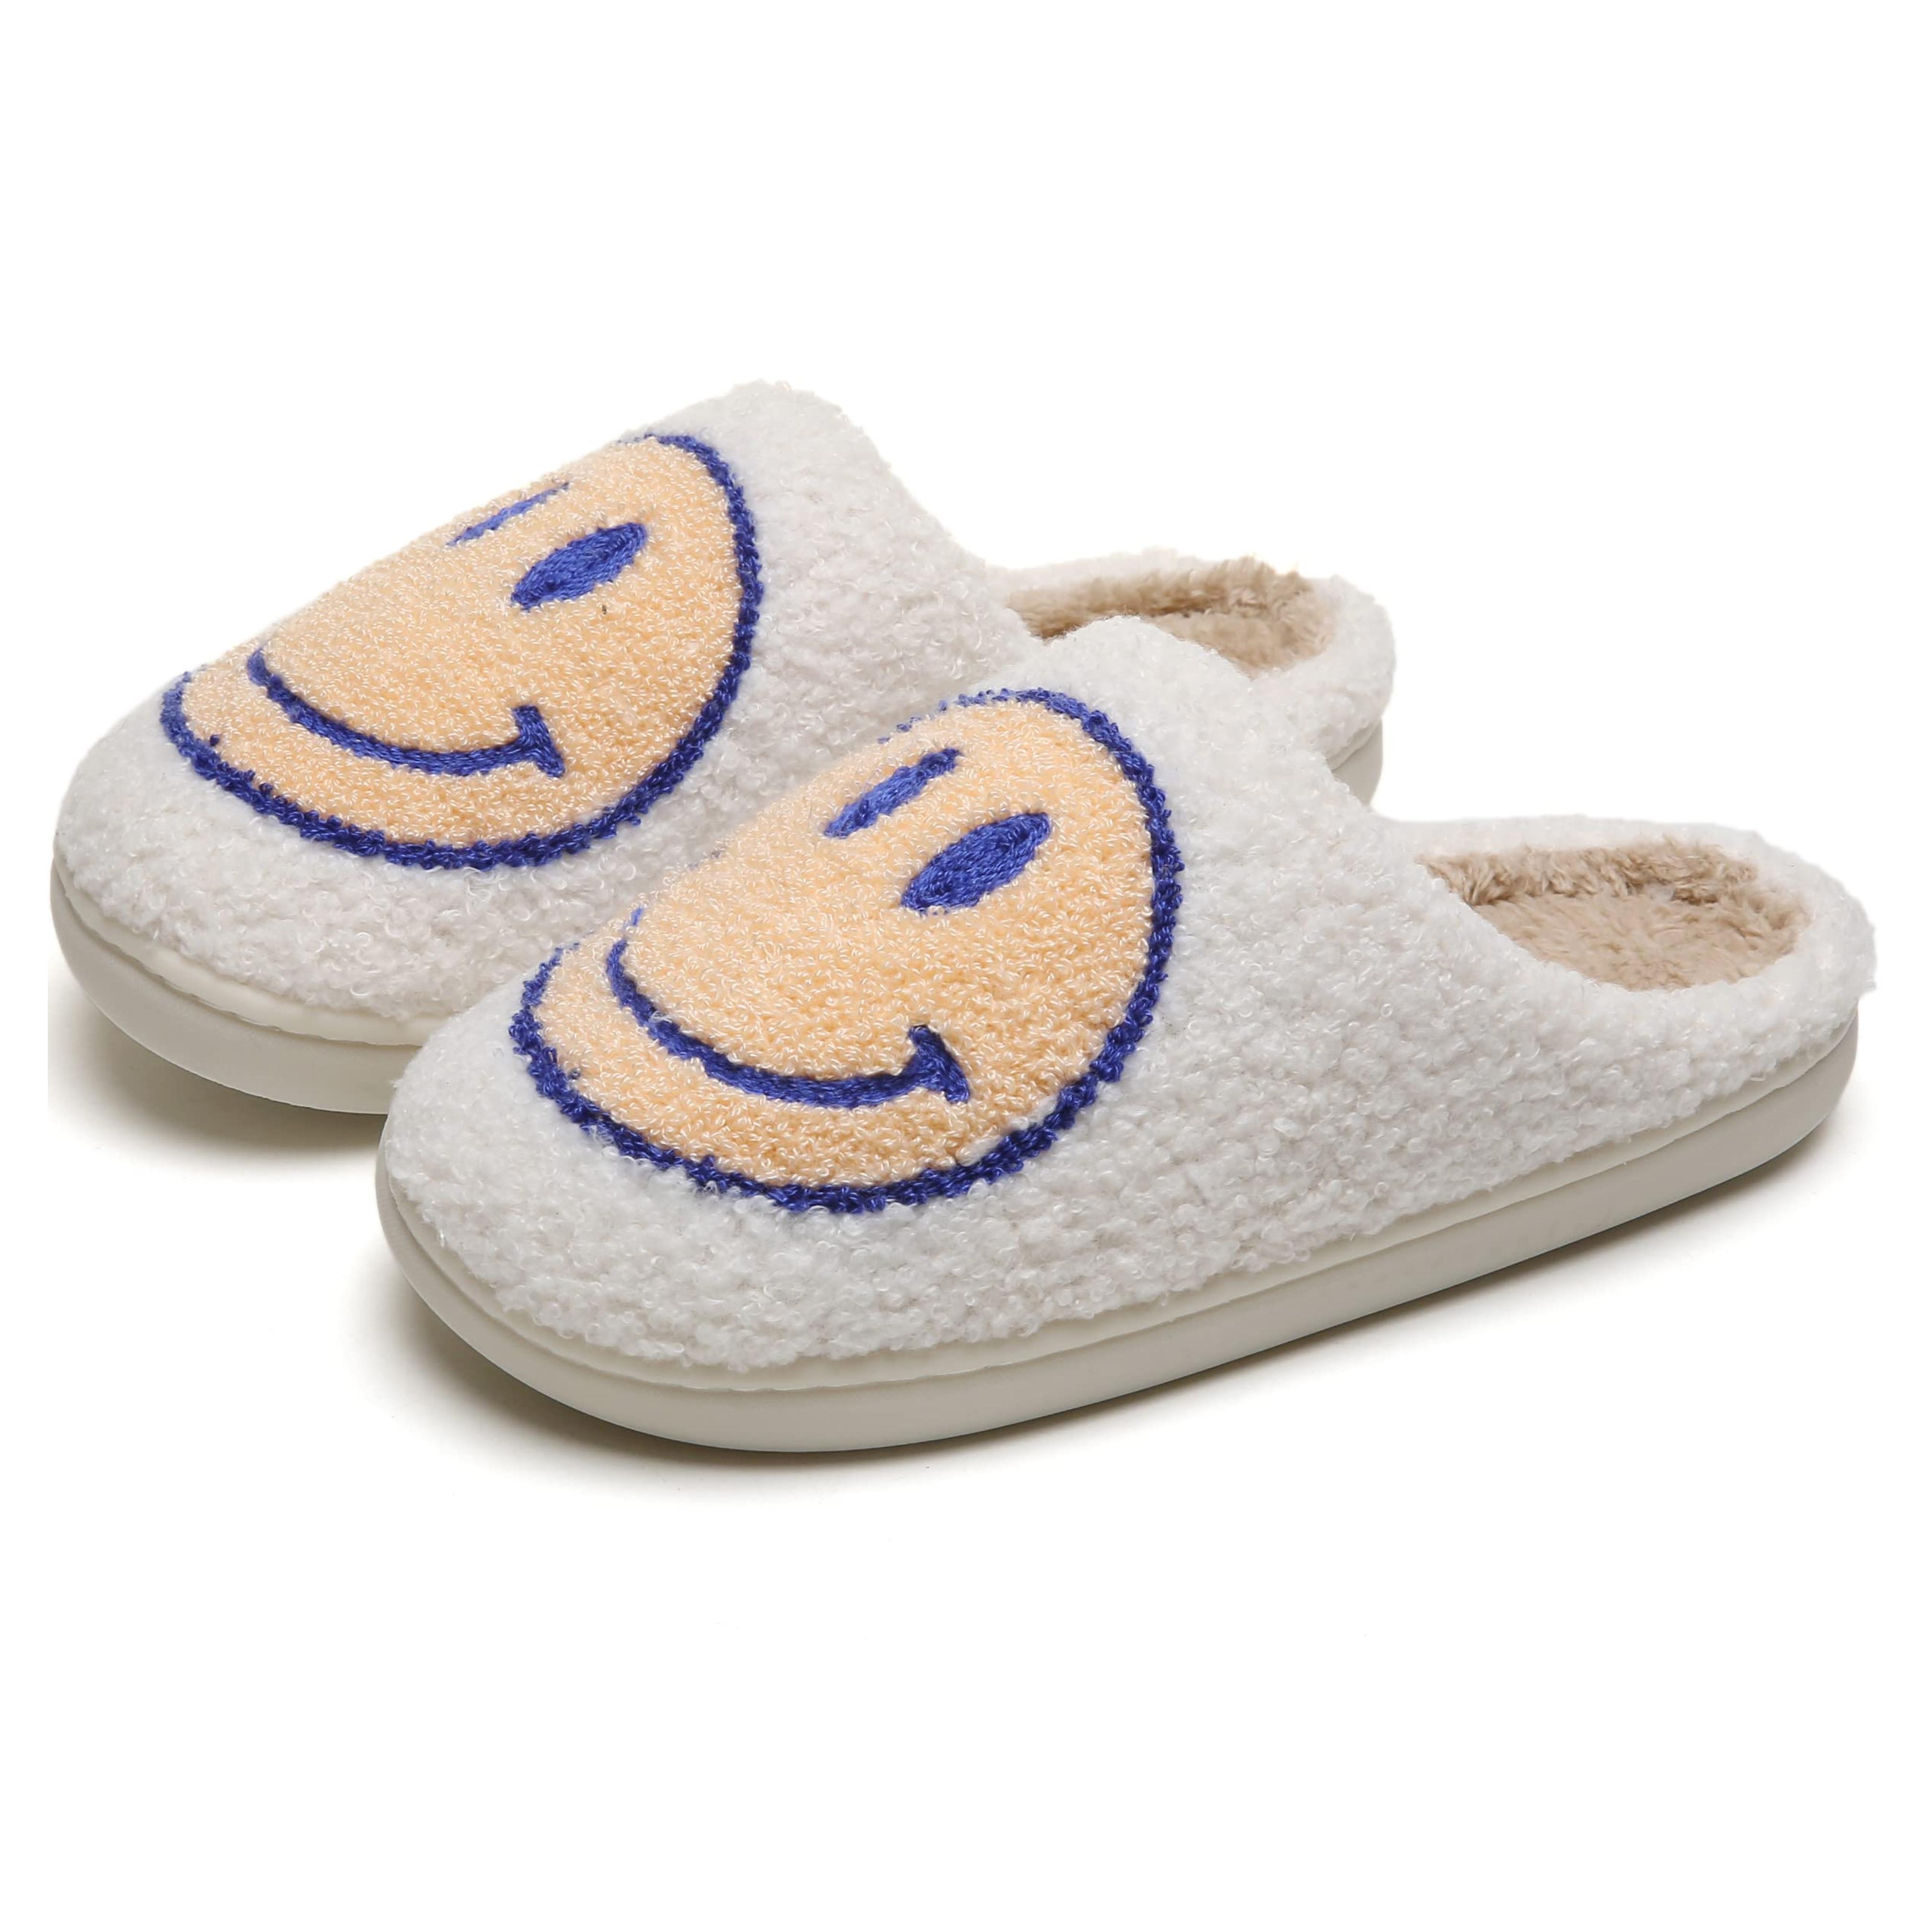 Amazon.com: smiley face slippers for women indoor and outdoor menfluffy cute,B,6.5-7.5 Women/6-7 Men : Everything Else